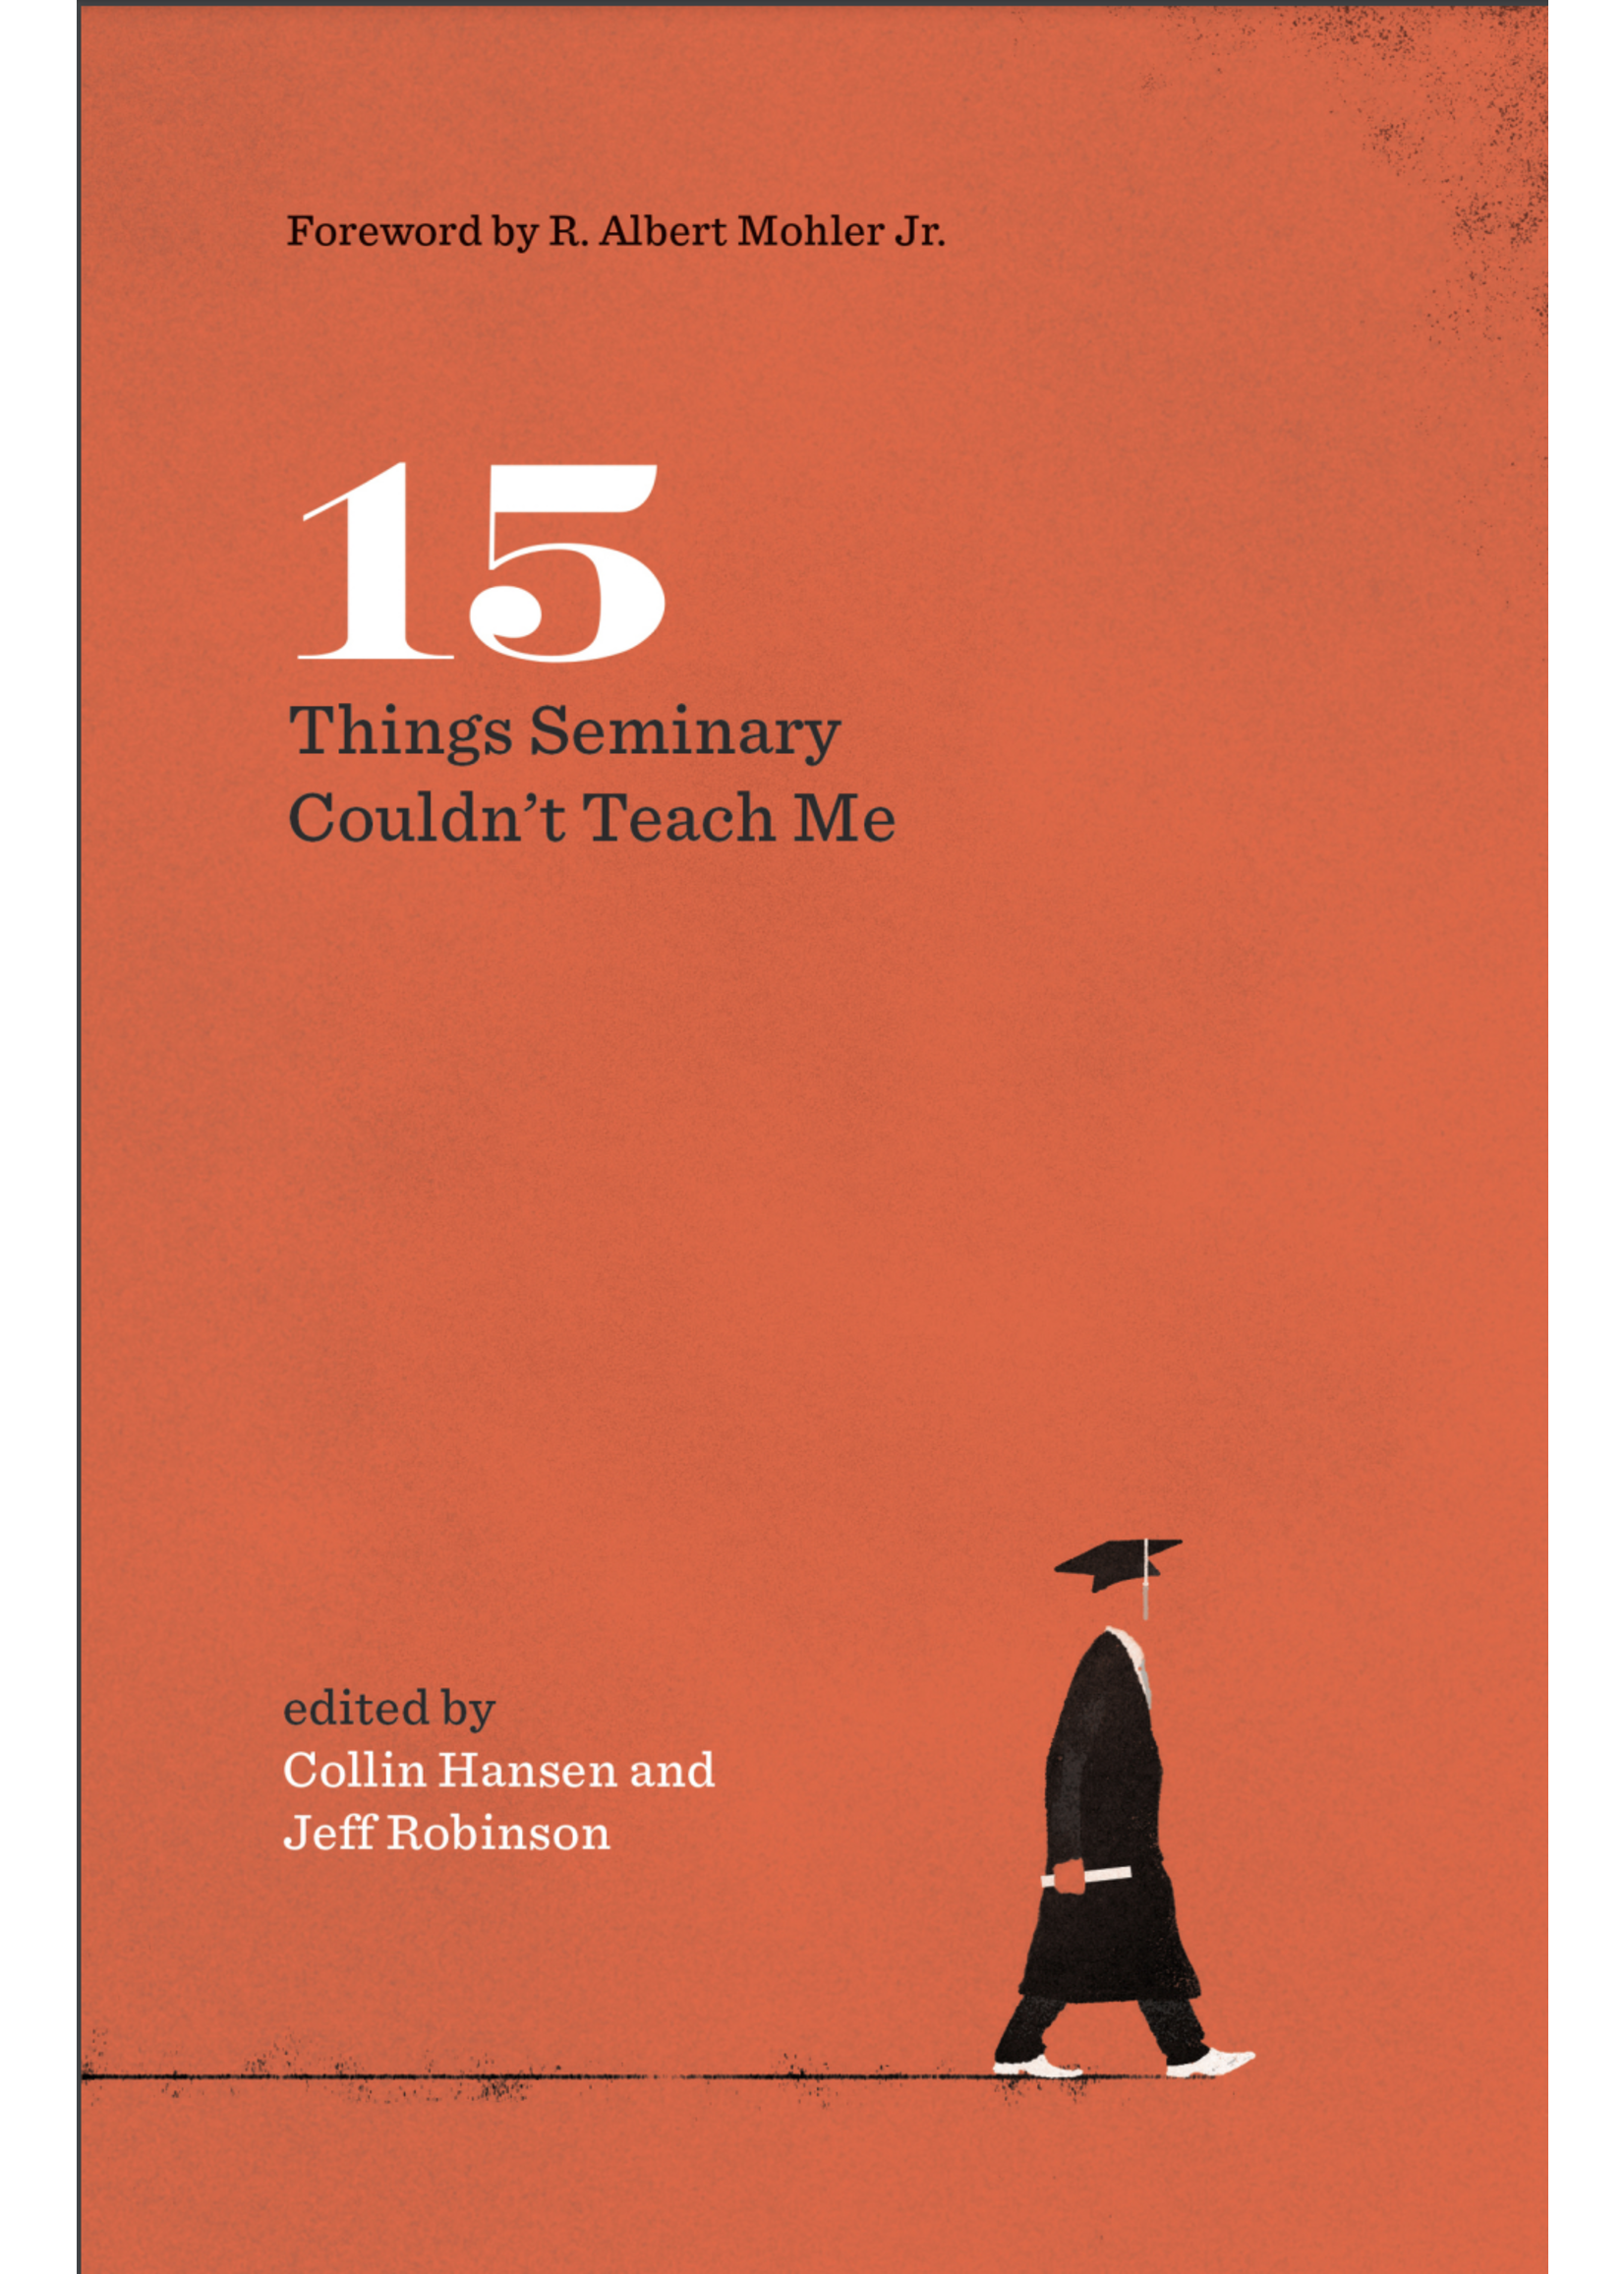 archived 15 Things Seminary Couldn’t Teach Me [Collin Hansen & Jeff Robinson]